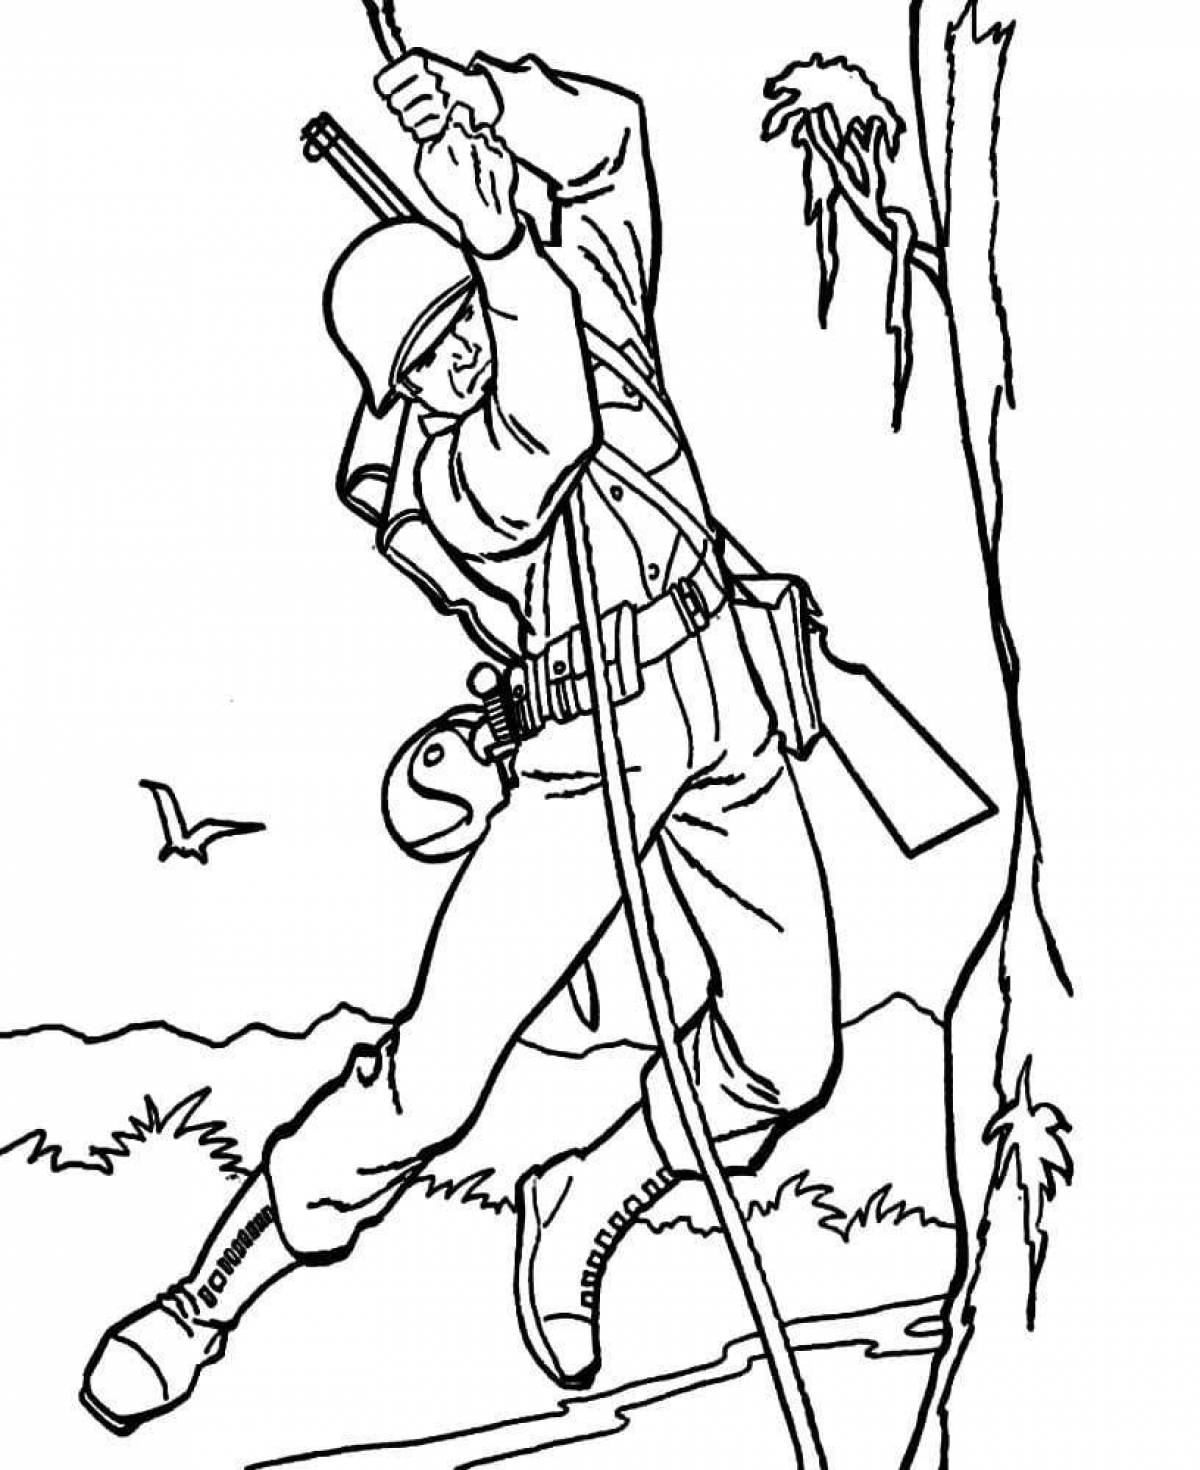 Coloring page dazzling soldier with dog